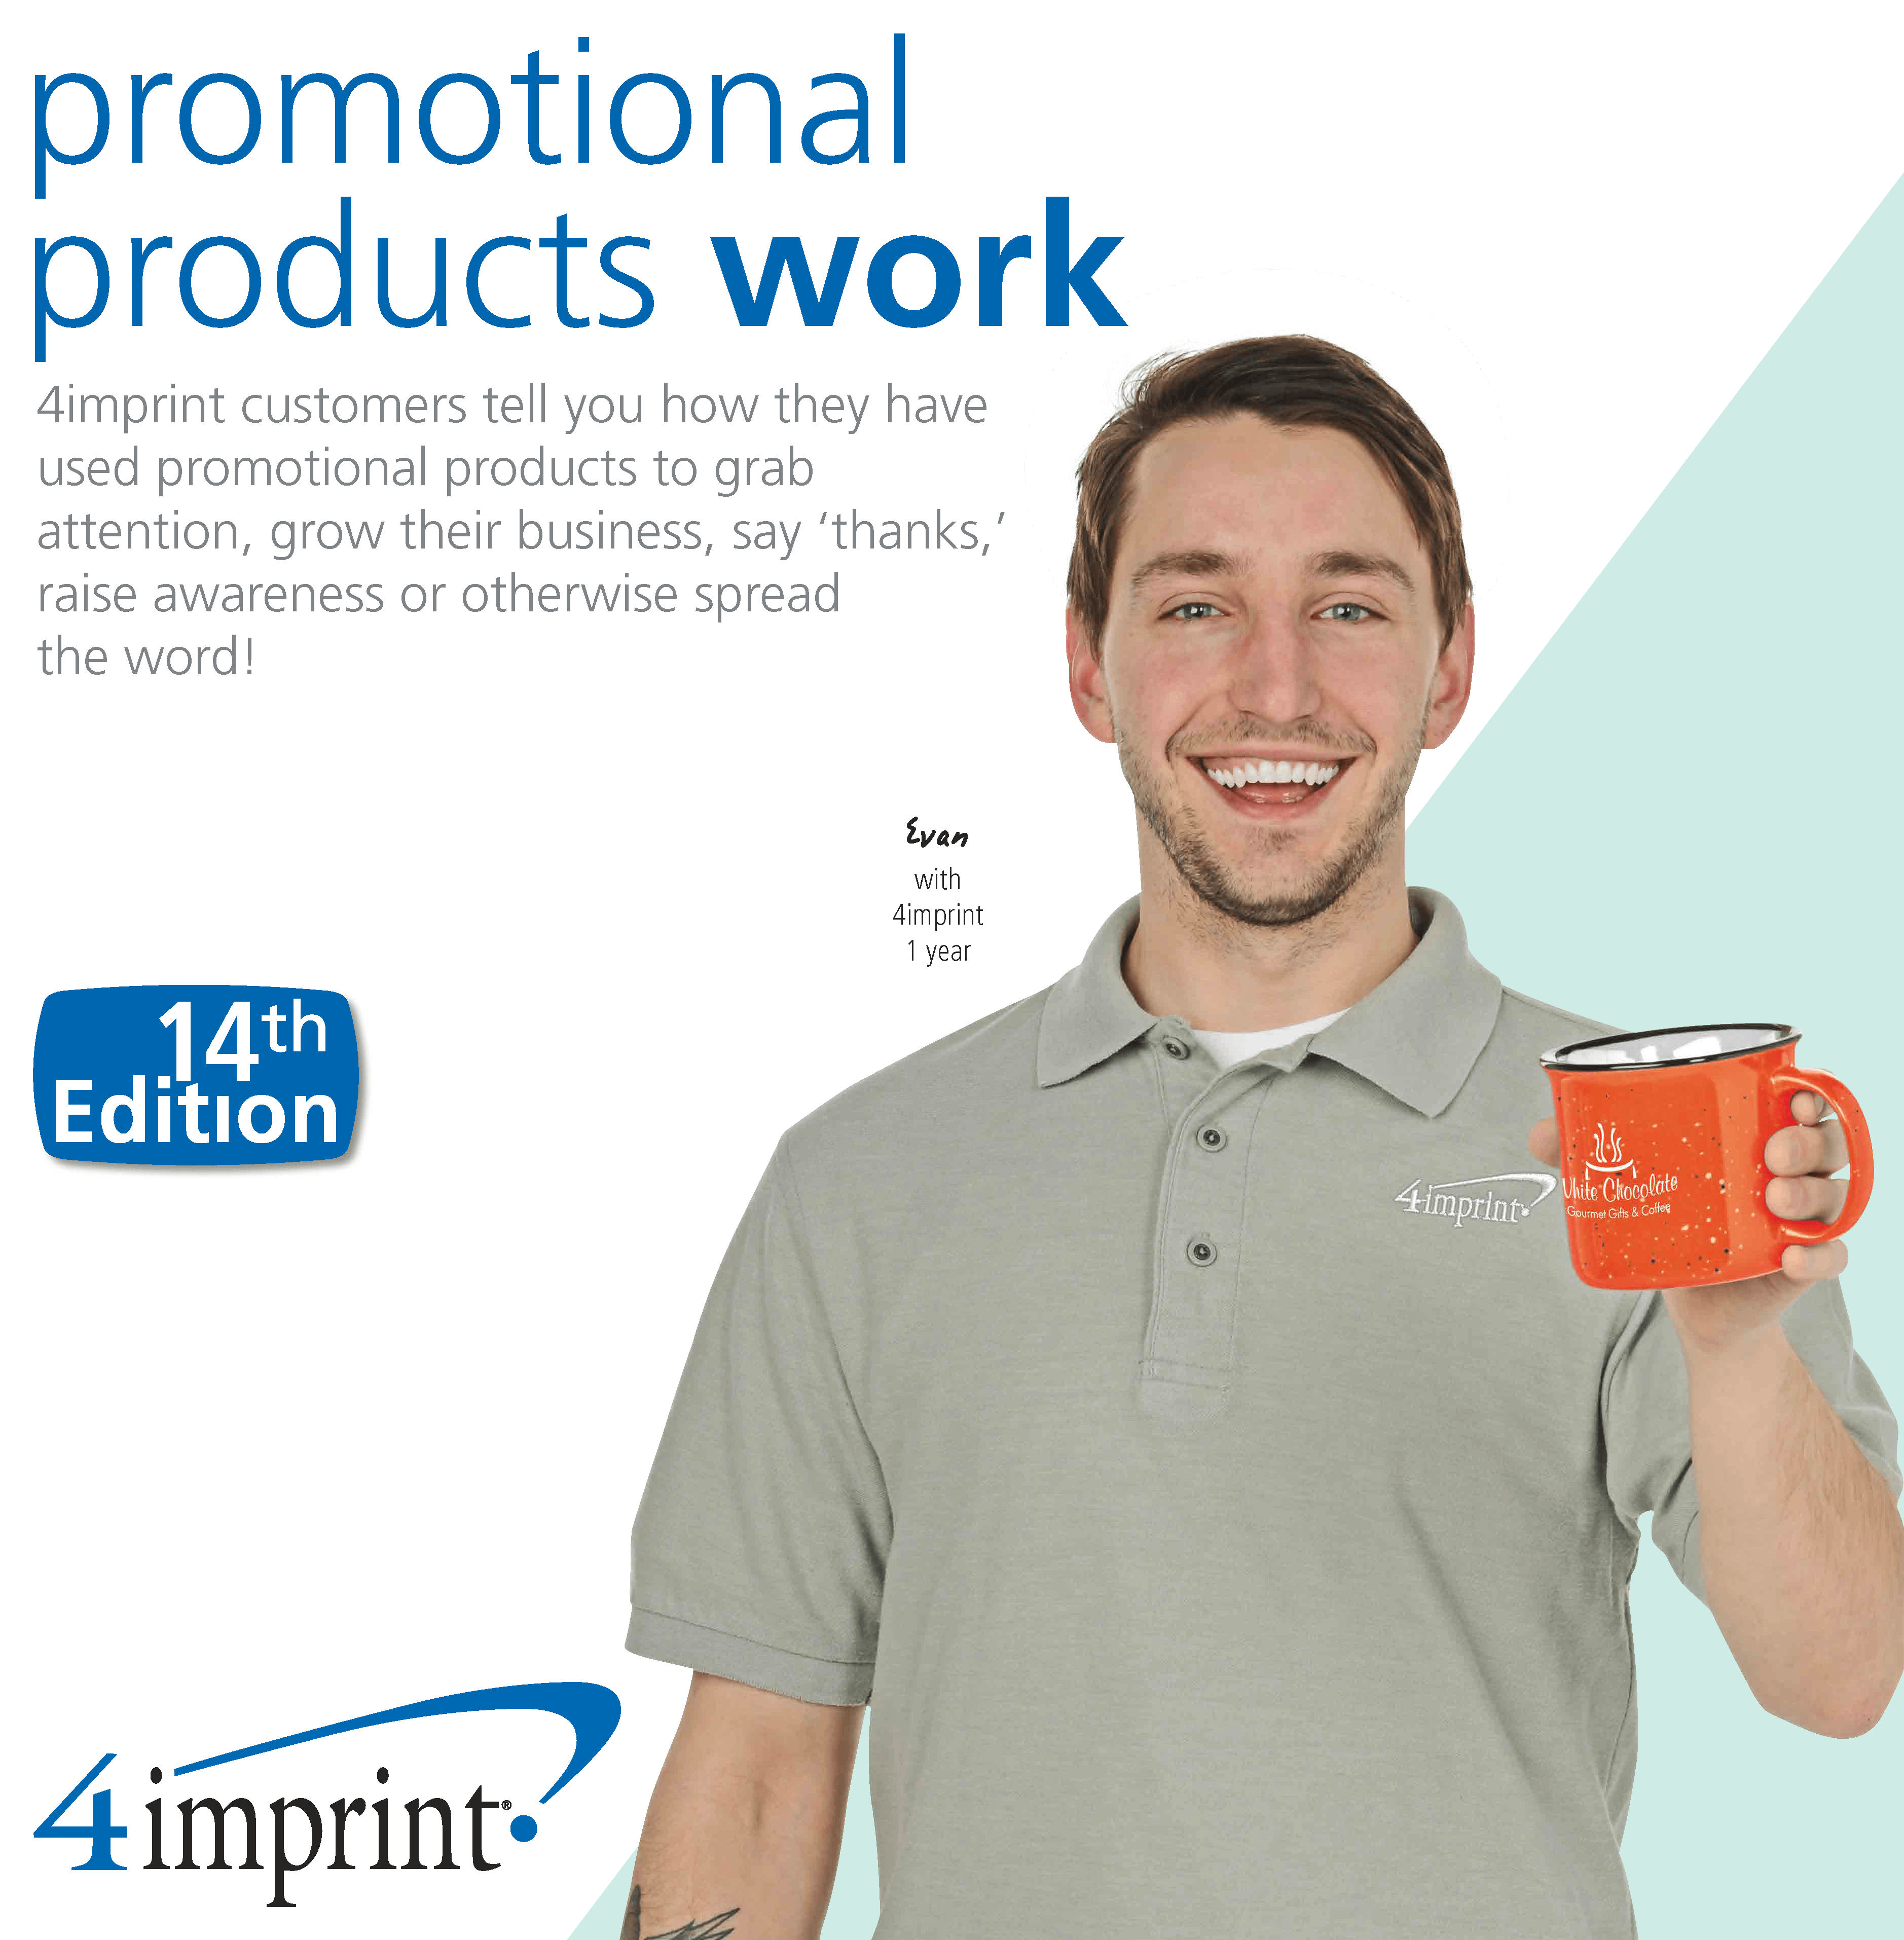 Promotional Products Work 7th Ed - 4imprint Learning Ctr.